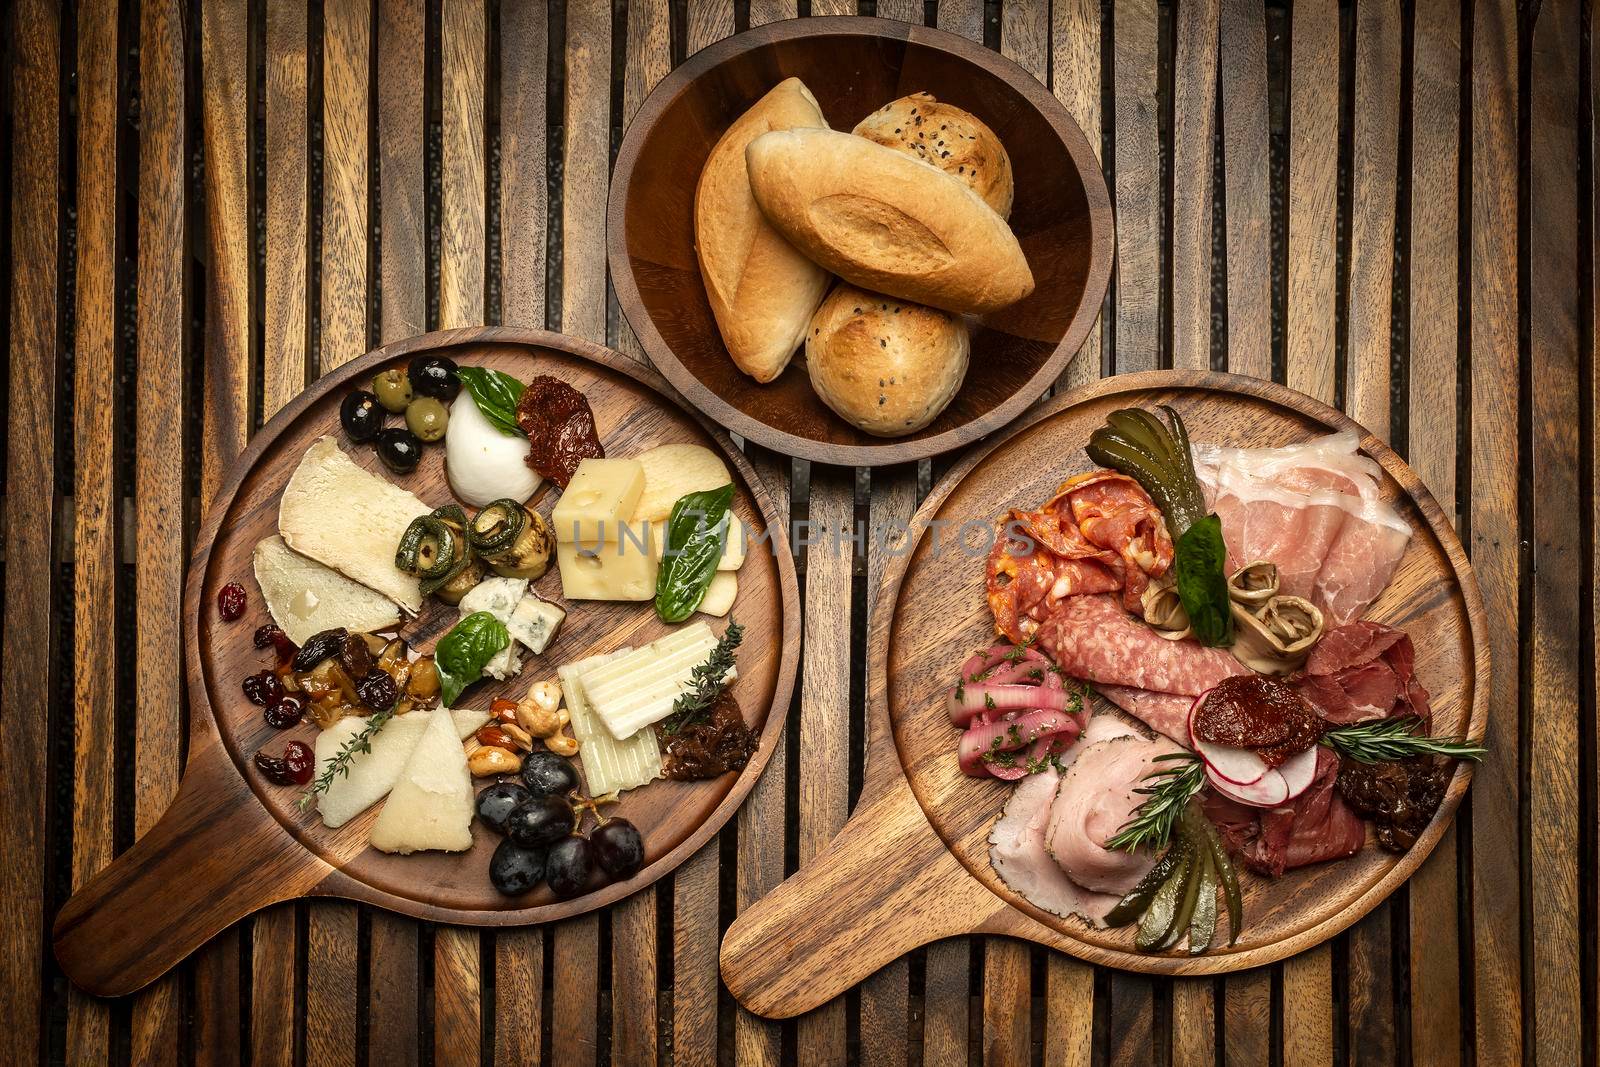 antipasto gourmet charcuterie and cheese cold cuts platter on wood board